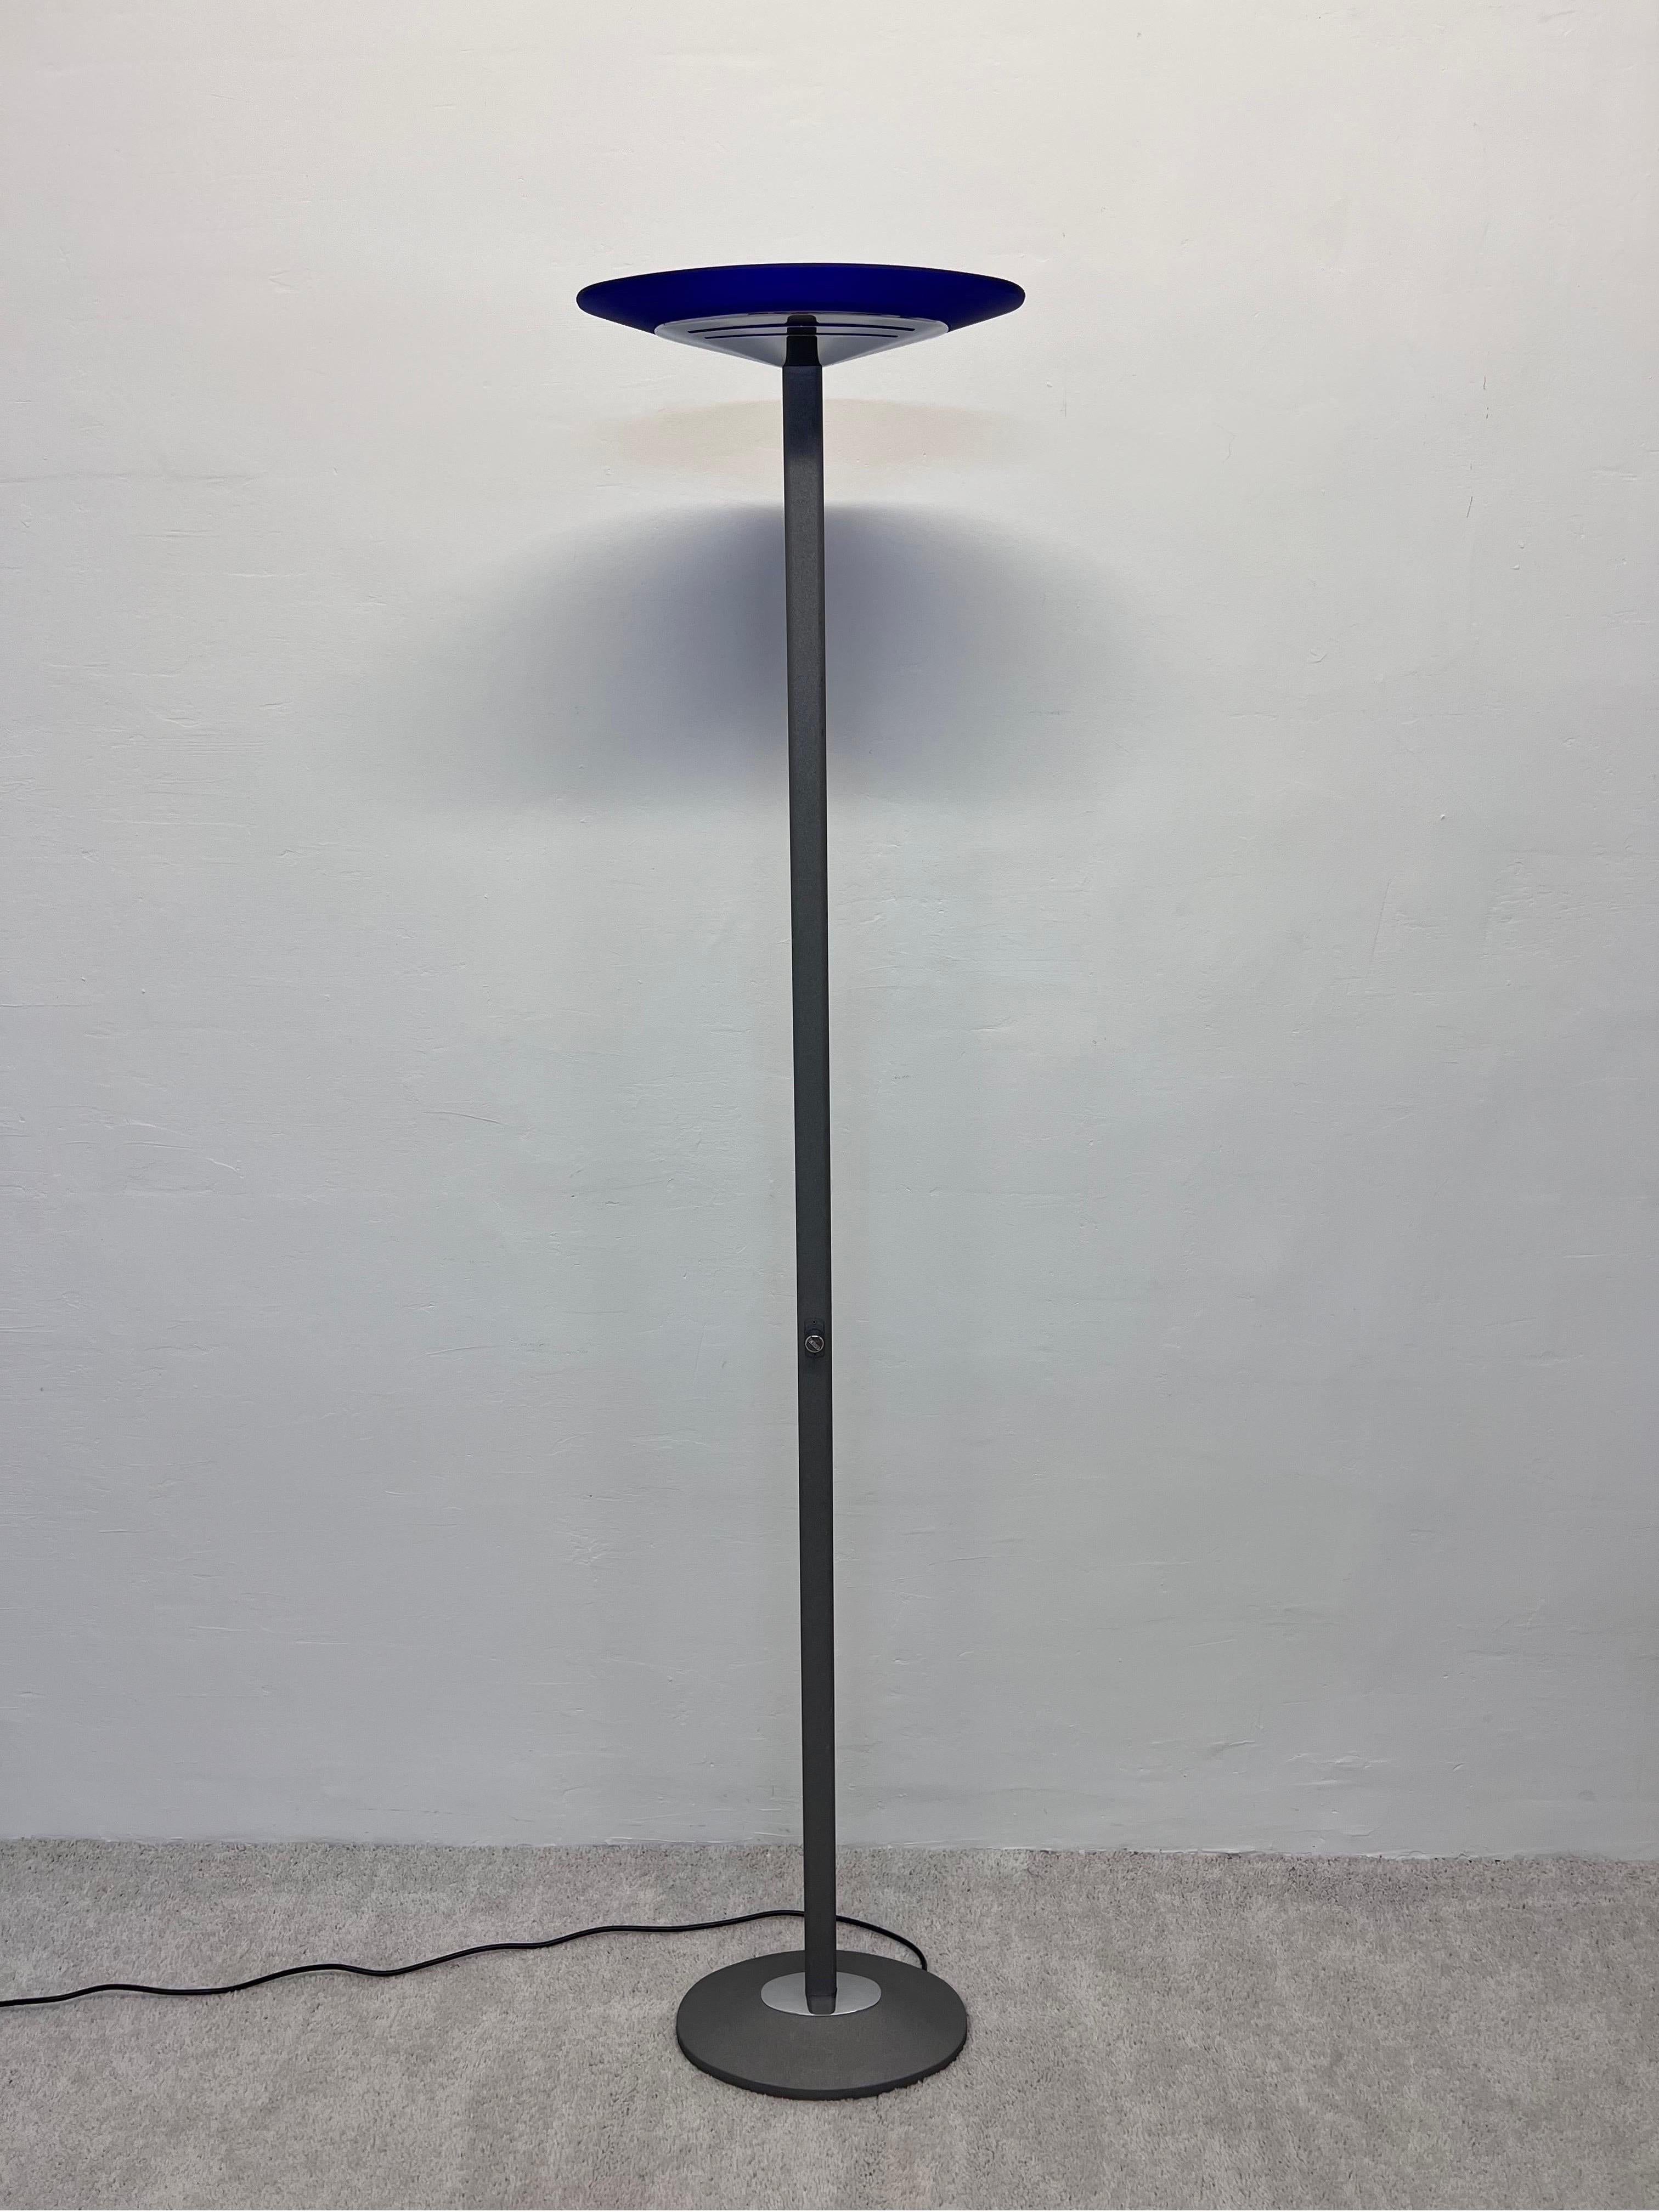 Postmodern dimmable halogen torchiere floor lamp with frosted blue glass and chrome shade attached to a gray textured stem and base by Estiluz, Spain 1990s.

Estiluz is an iconic Spanish lighting company founded in 1969 by Gerard Maseu Jordà.